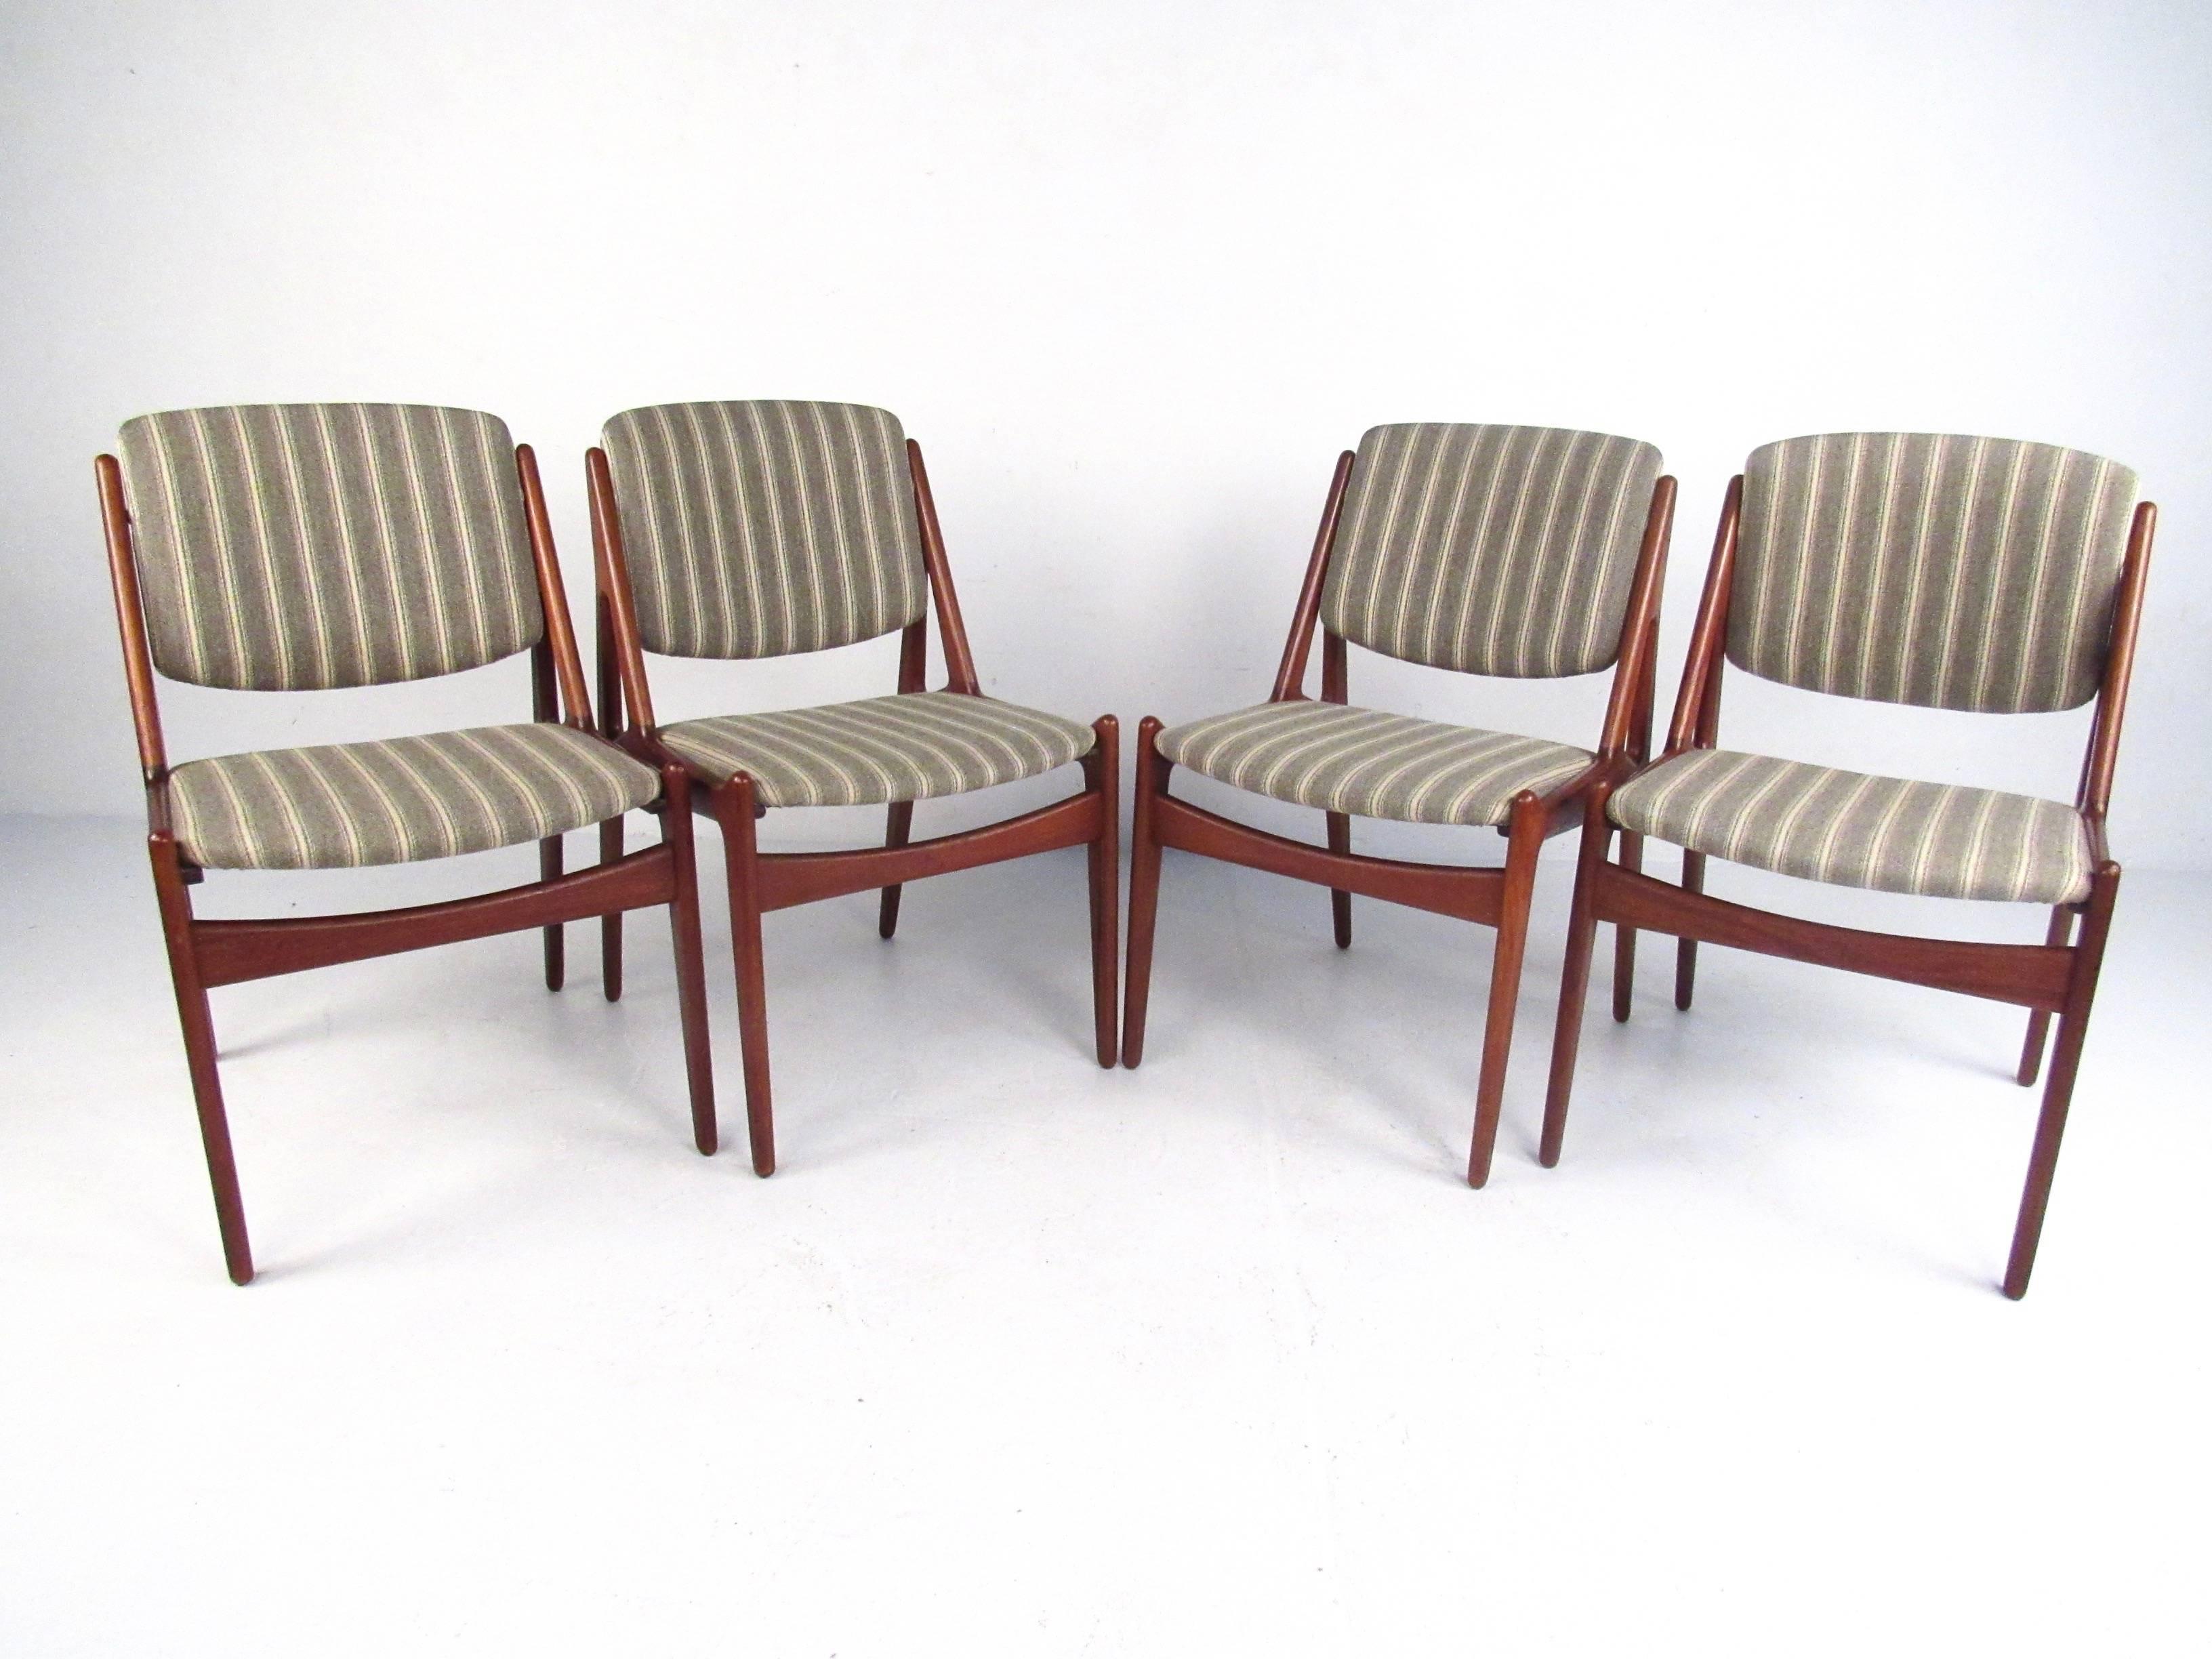 This stunning set of Danish modern dining chairs features sculpted teak frames, with pivoting backs and paired with striped vintage fabric. Designed by Mid-Century great Arne Vodder for Vamo Møbelfabrik, this exquisite matching set of four makes an